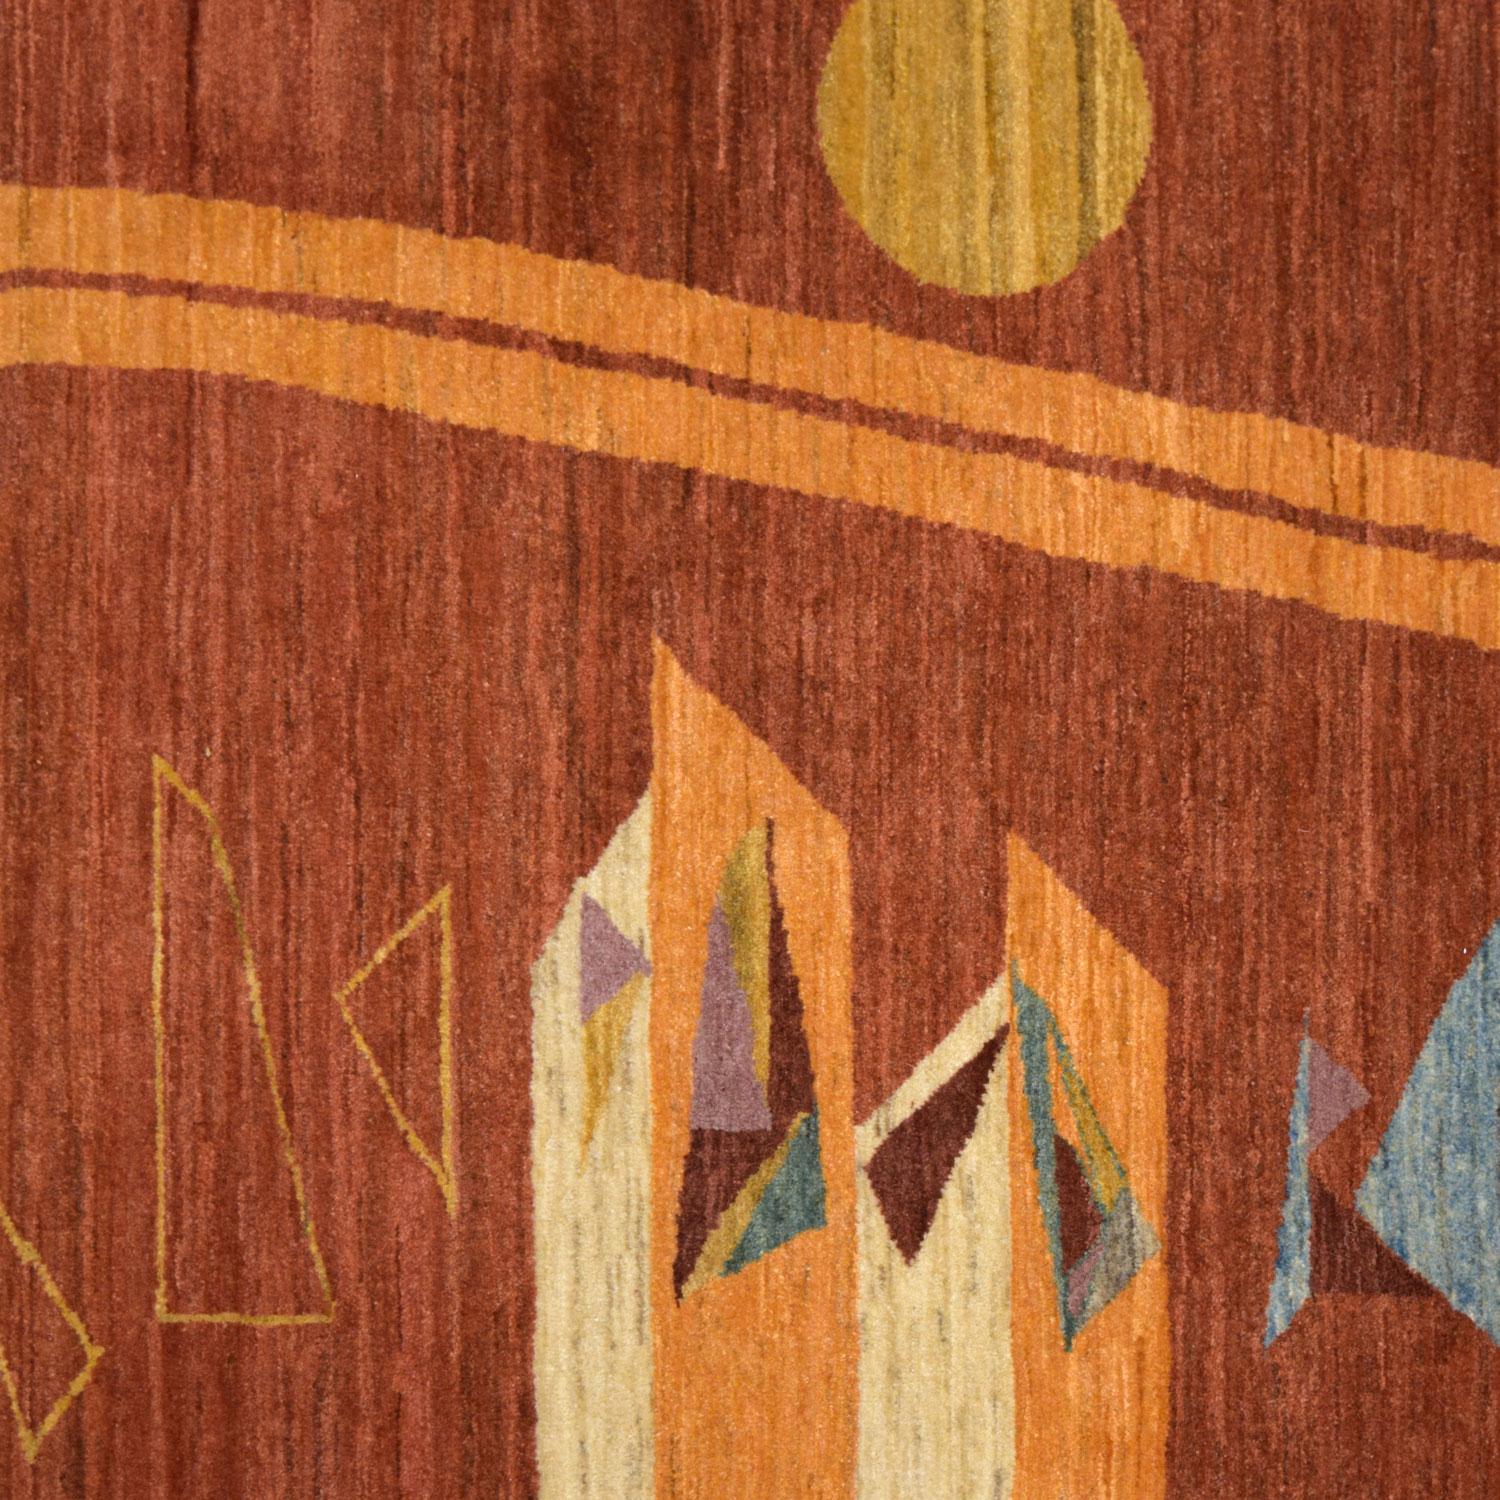 Multicolored shapes drift slowly down upon the luscious red background of this abstract, hand-knotted wool carpet. Those elements, perched next to the golden sun and horizon, evoke a feeling of movement. Besides the motifs within the carpet, the